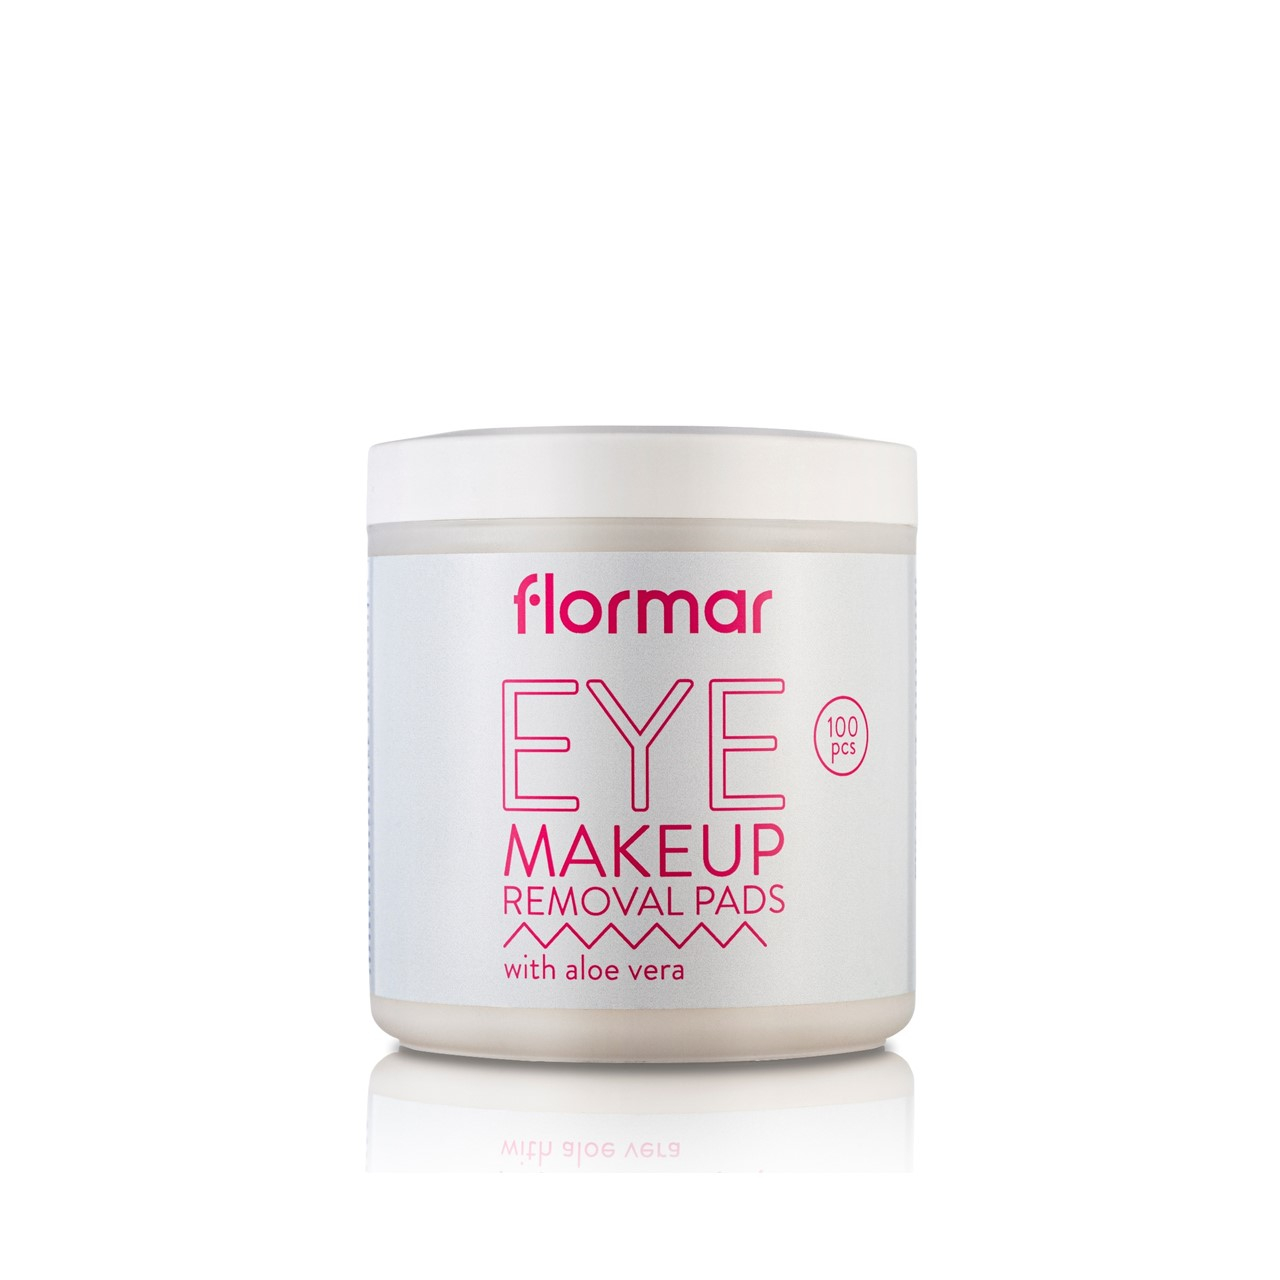 Flormar Eye Makeup Removal Pads With Aloe Vera x100